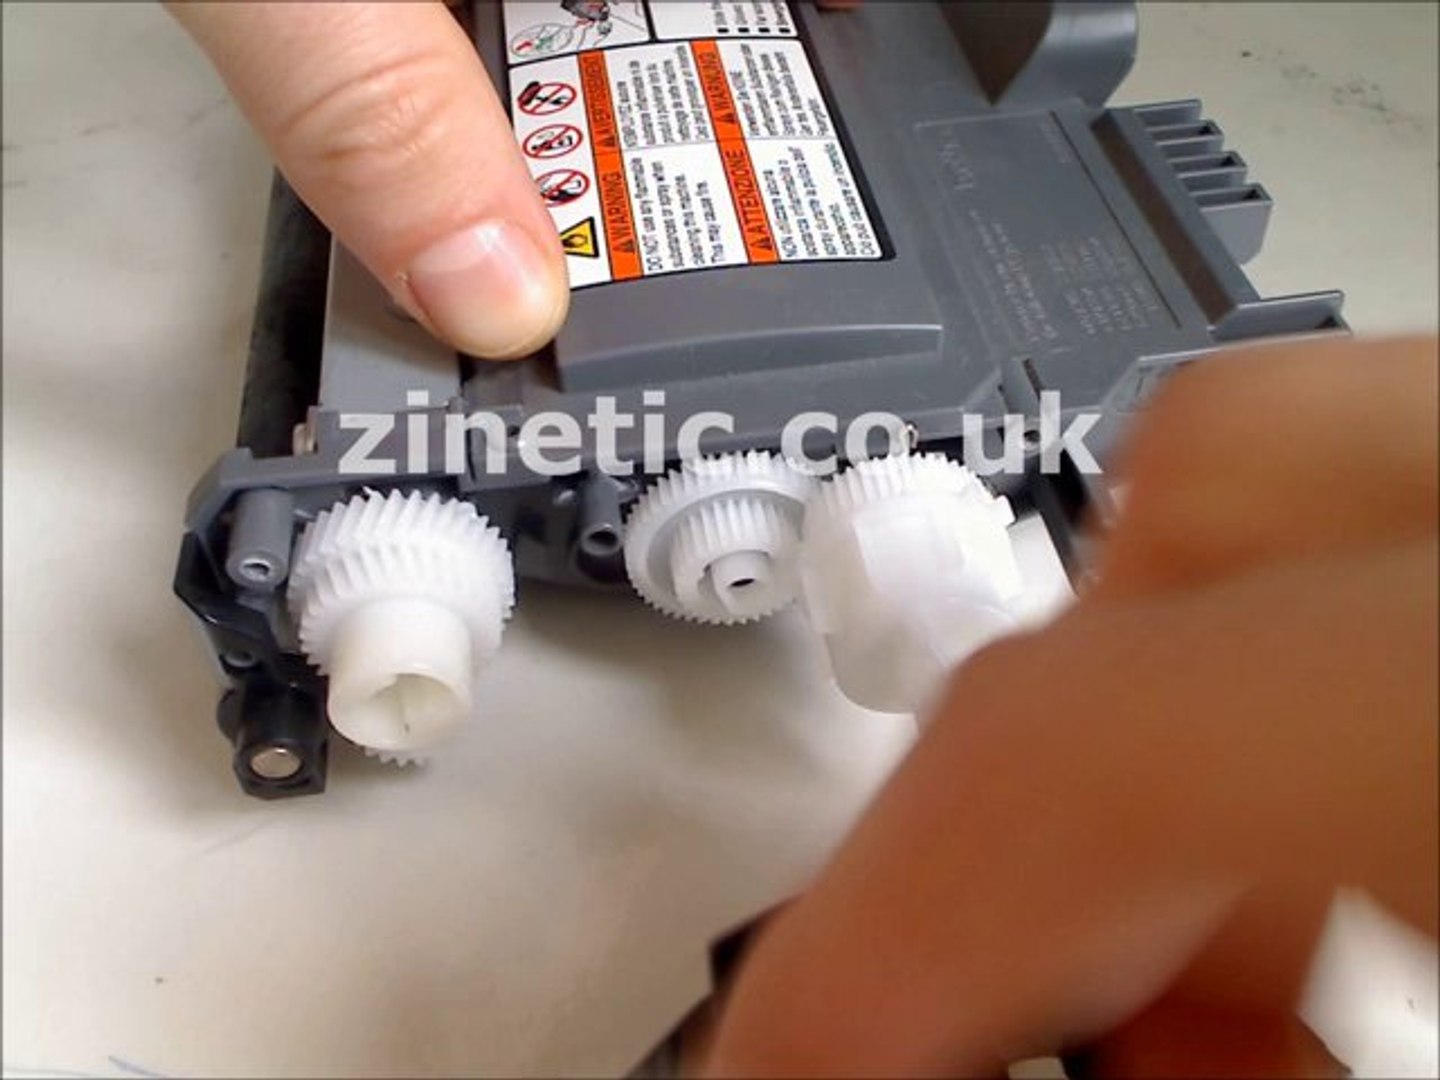 How to and reset the Brother DCP 7065 toner cartridge - video Dailymotion